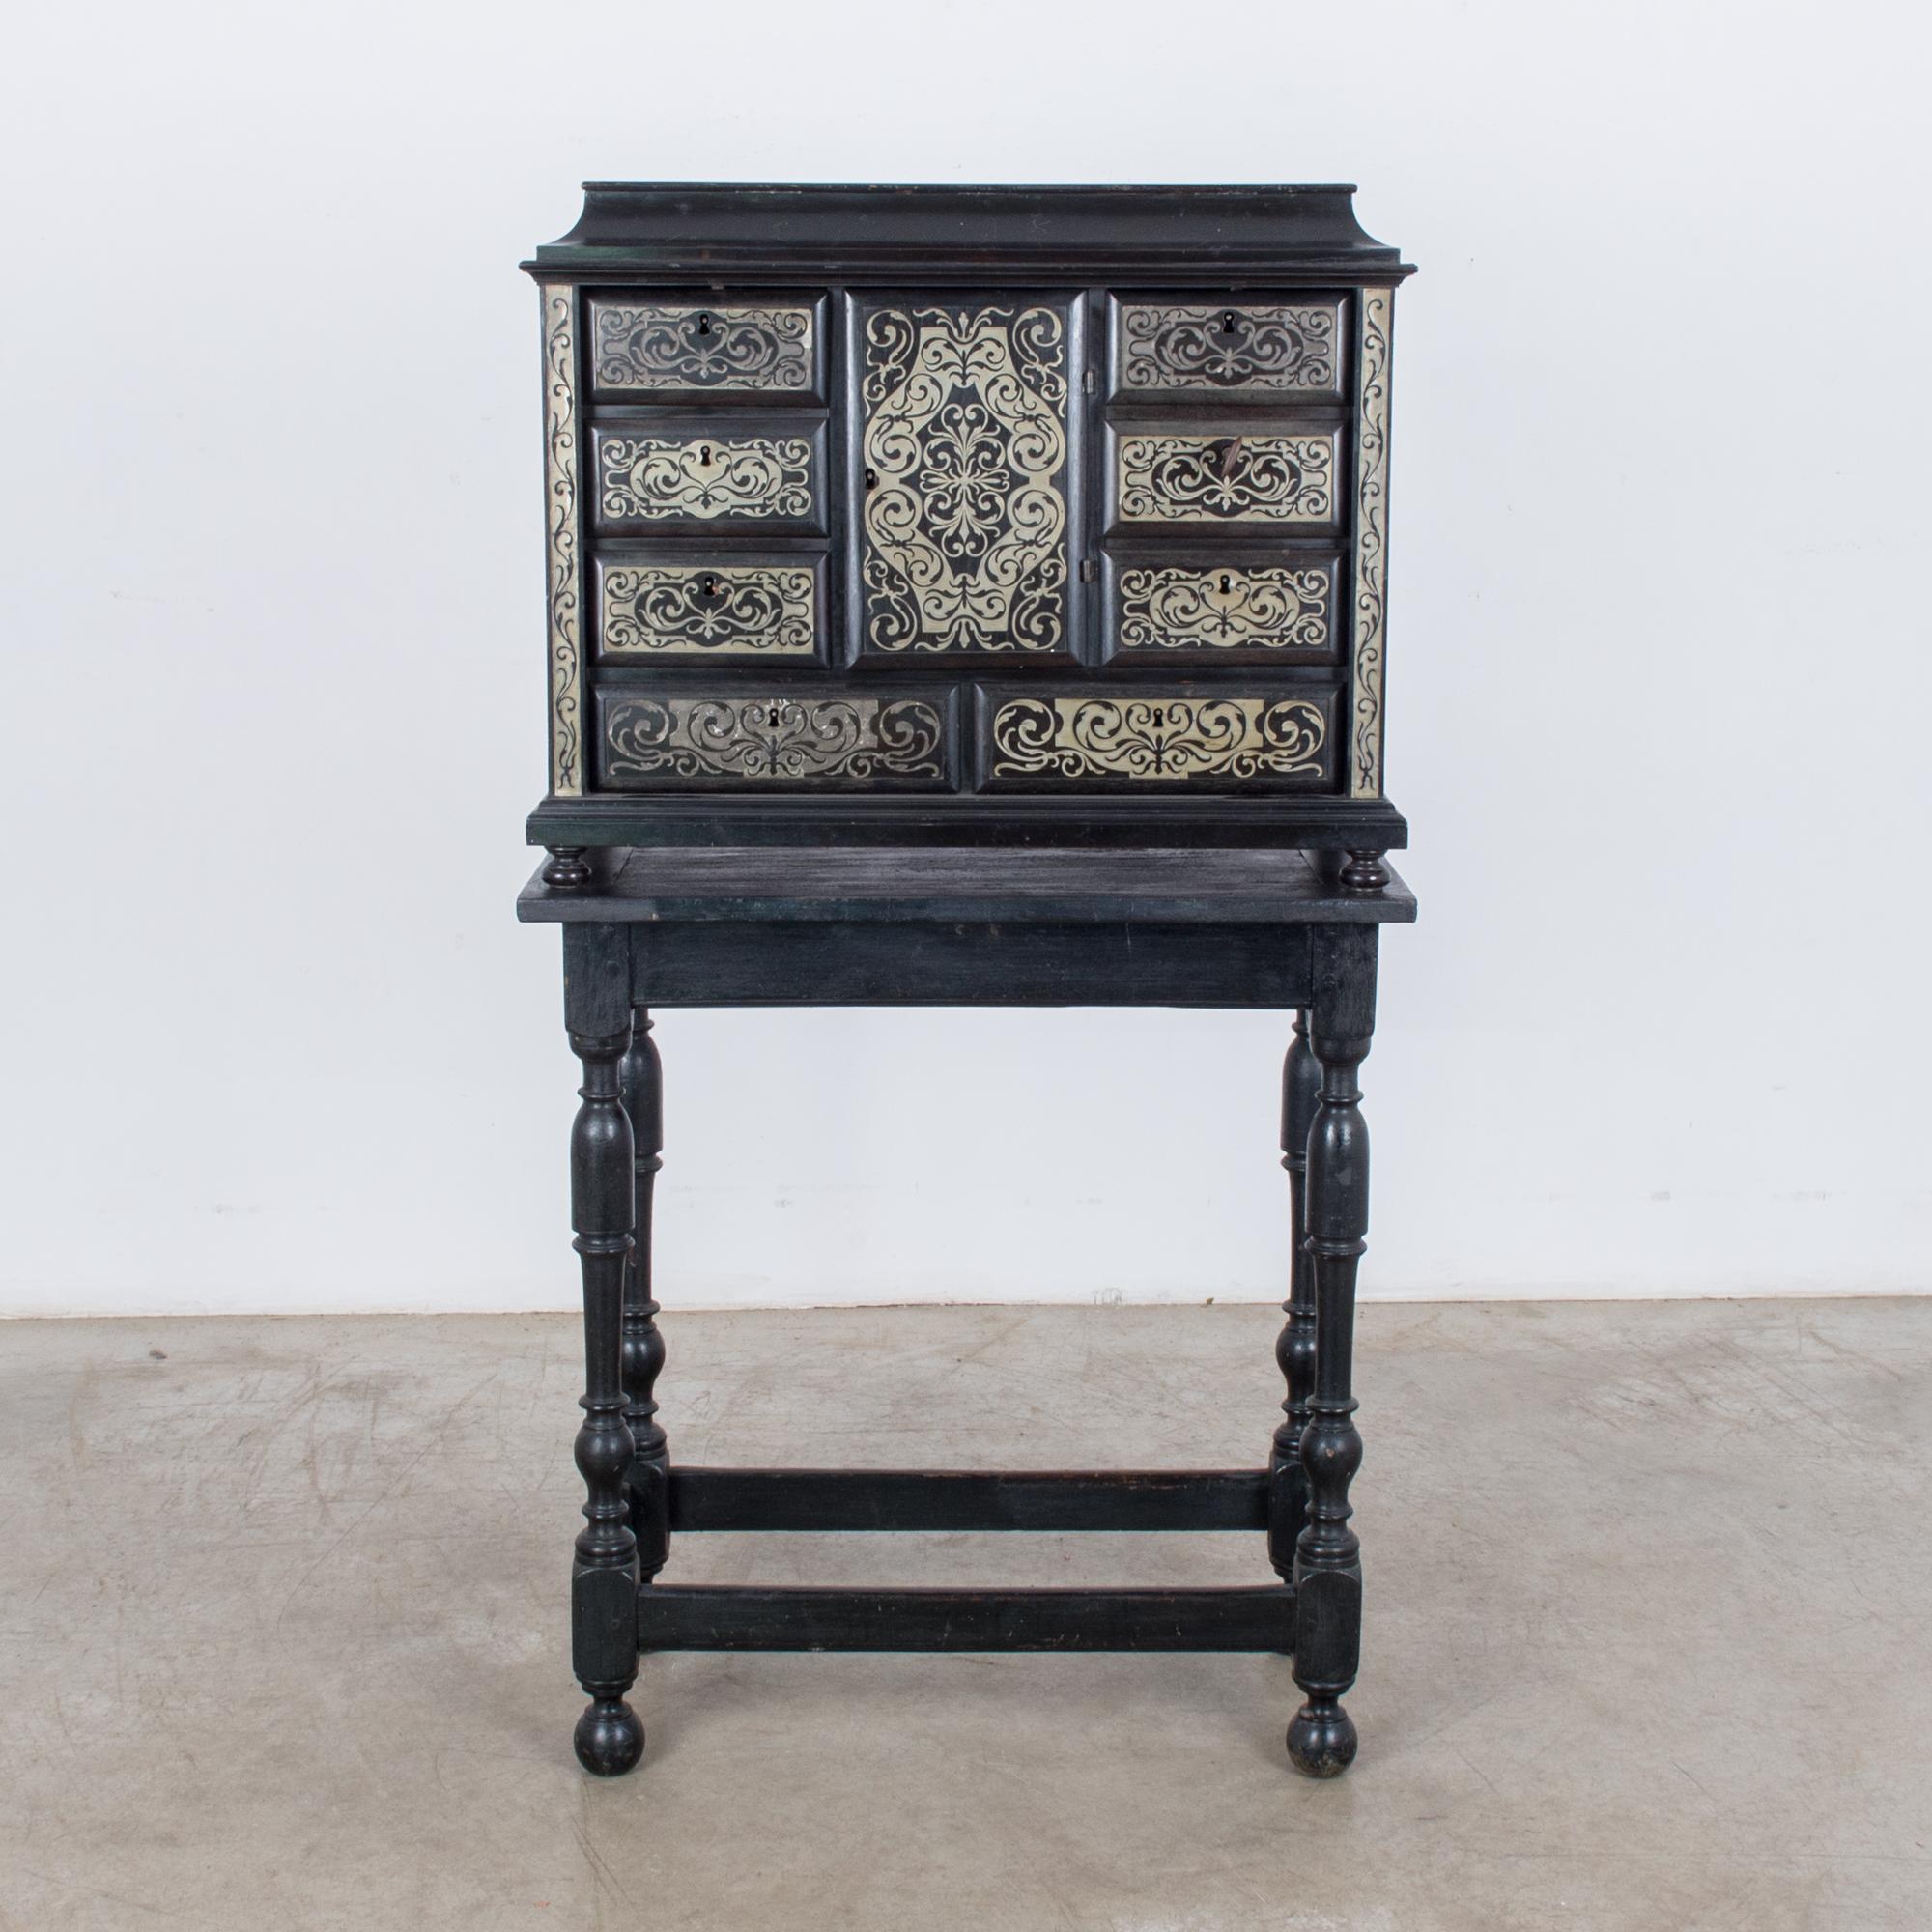 This impressive wooden chest of drawers was made in France, circa 1880, and is painted a glossy black with muted gold decorative scrolls on the face, with the original wood visible on the sides. The central compartment has a key and opens to reveal